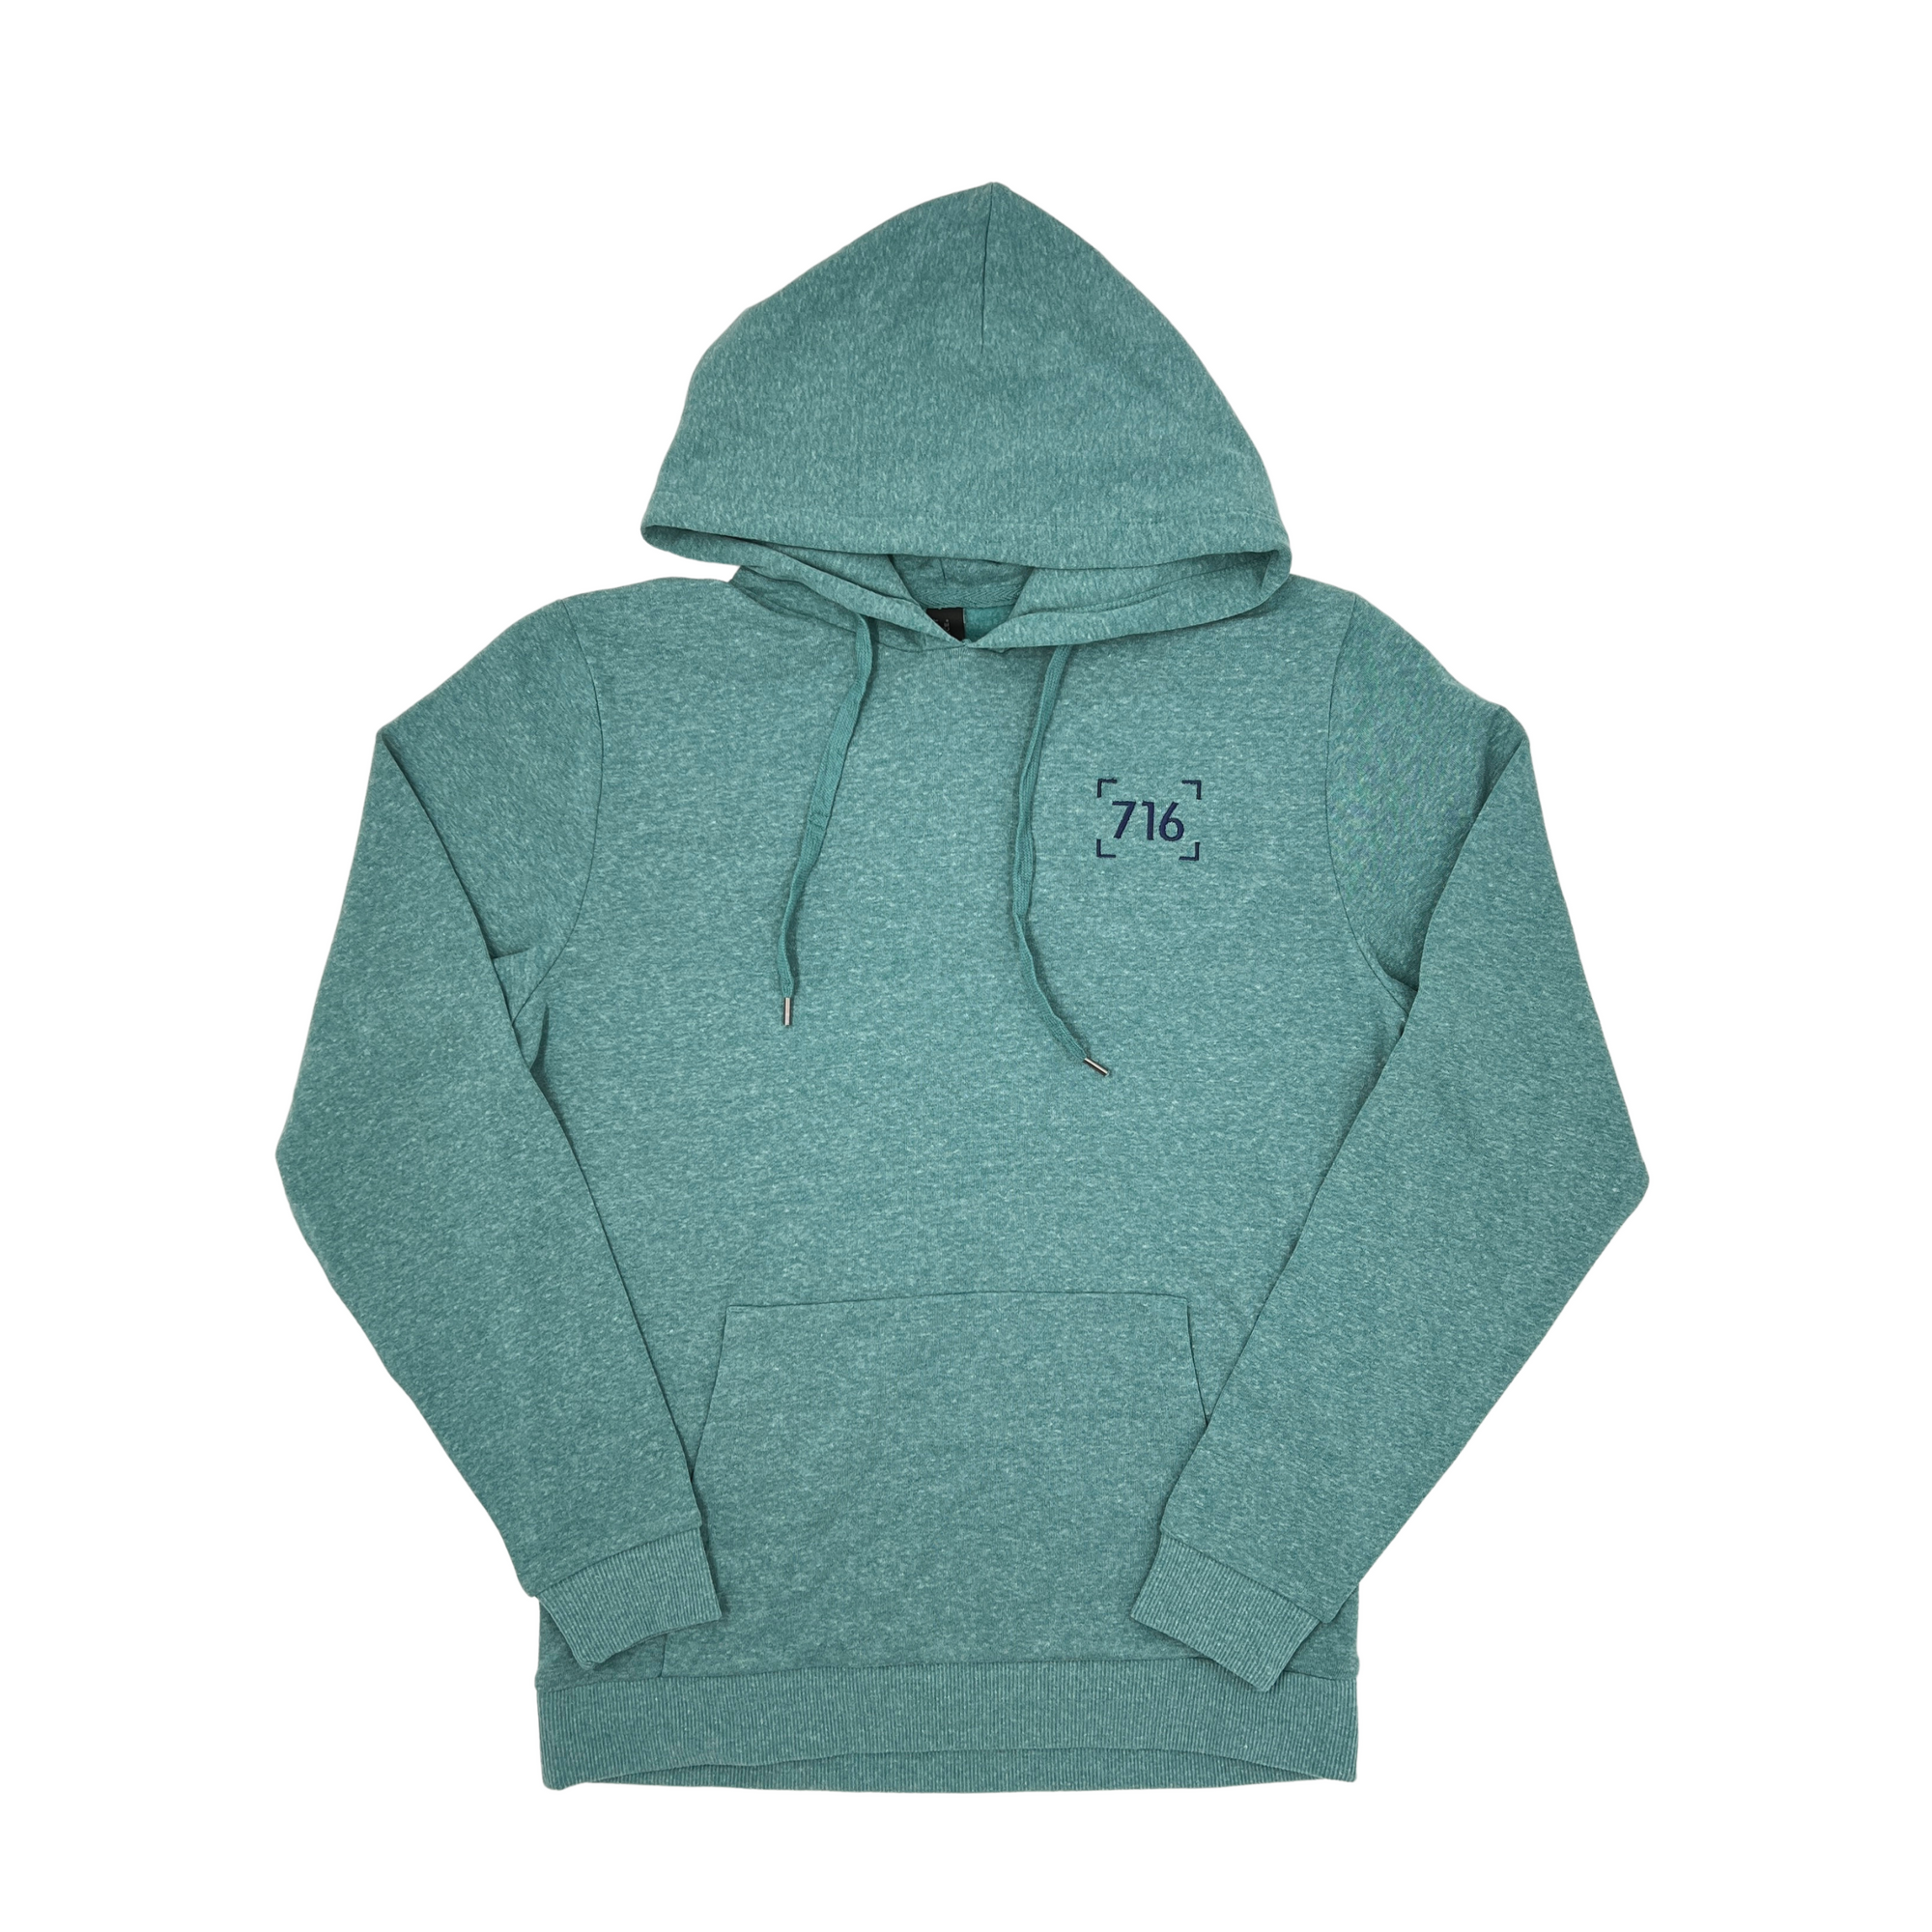 BFLO Embroidered 716 Heathered Green Hoodie